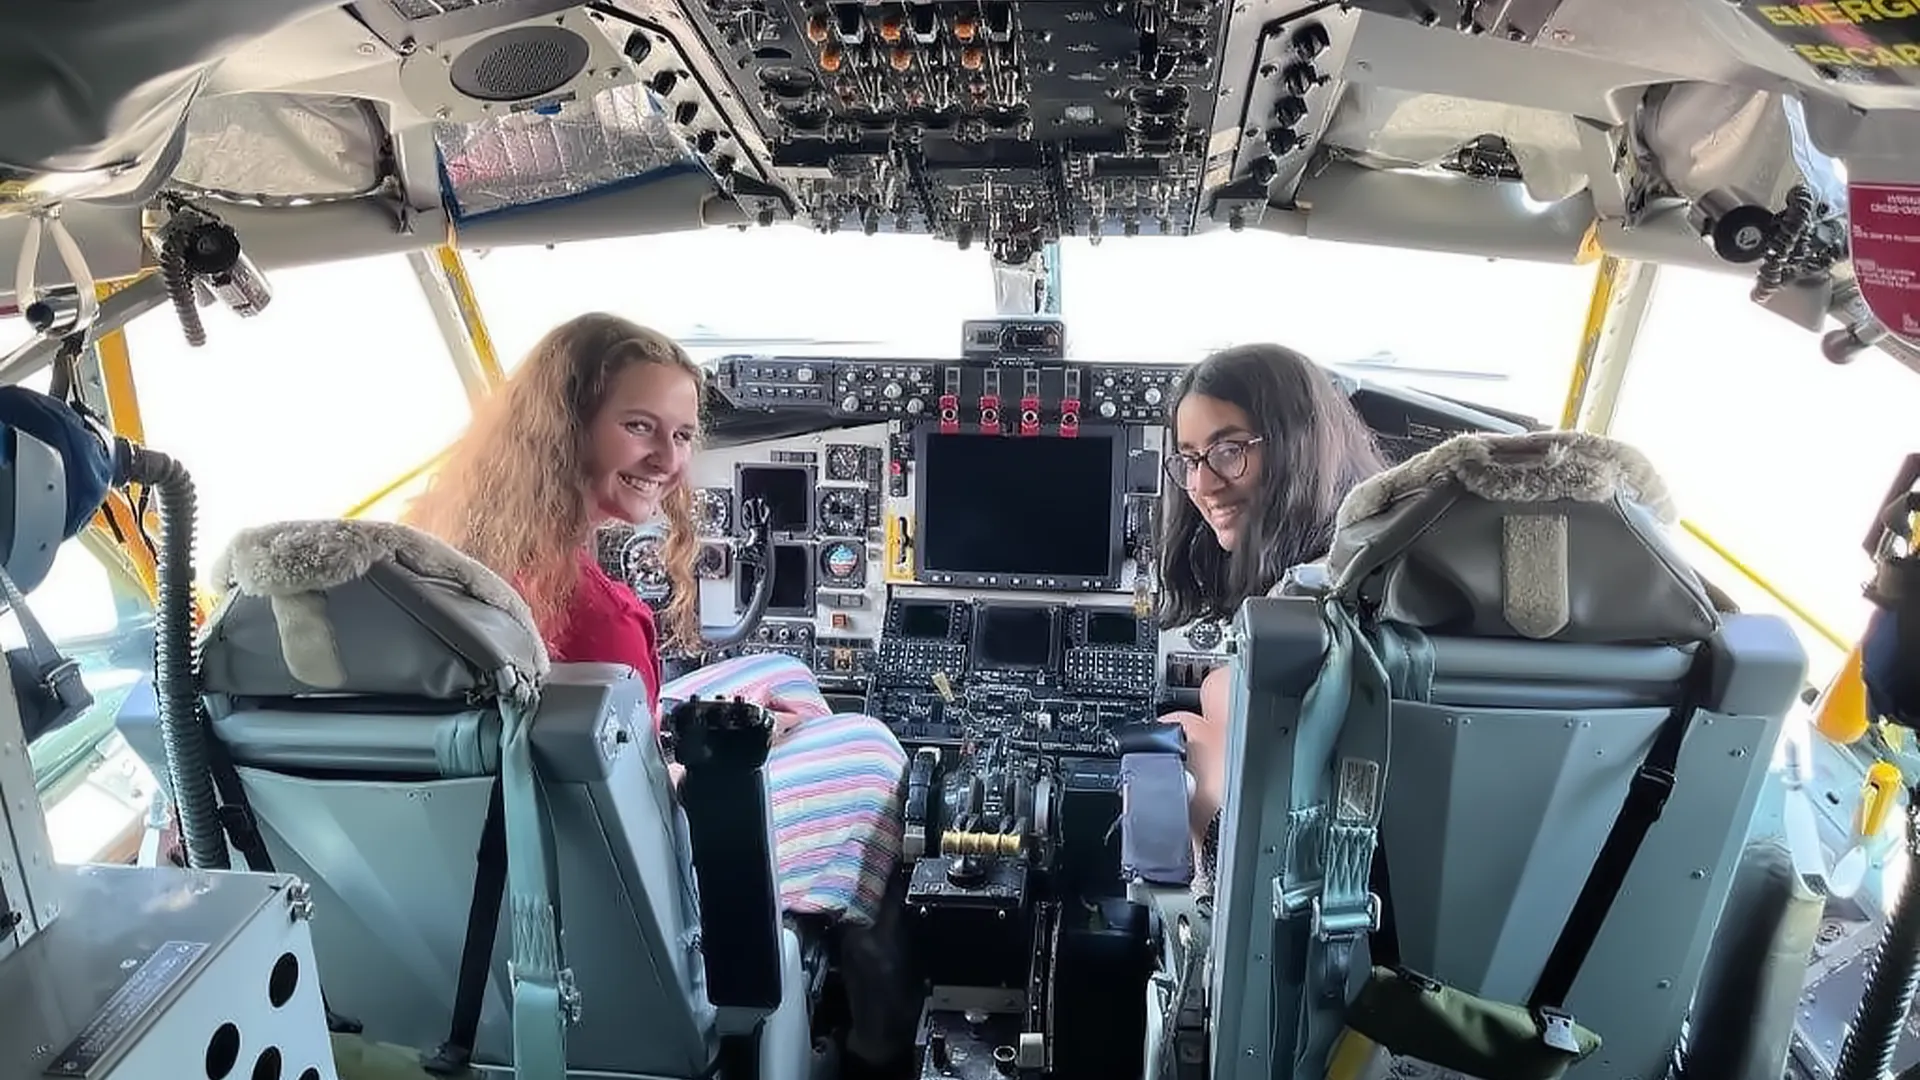 Students in Cockpit